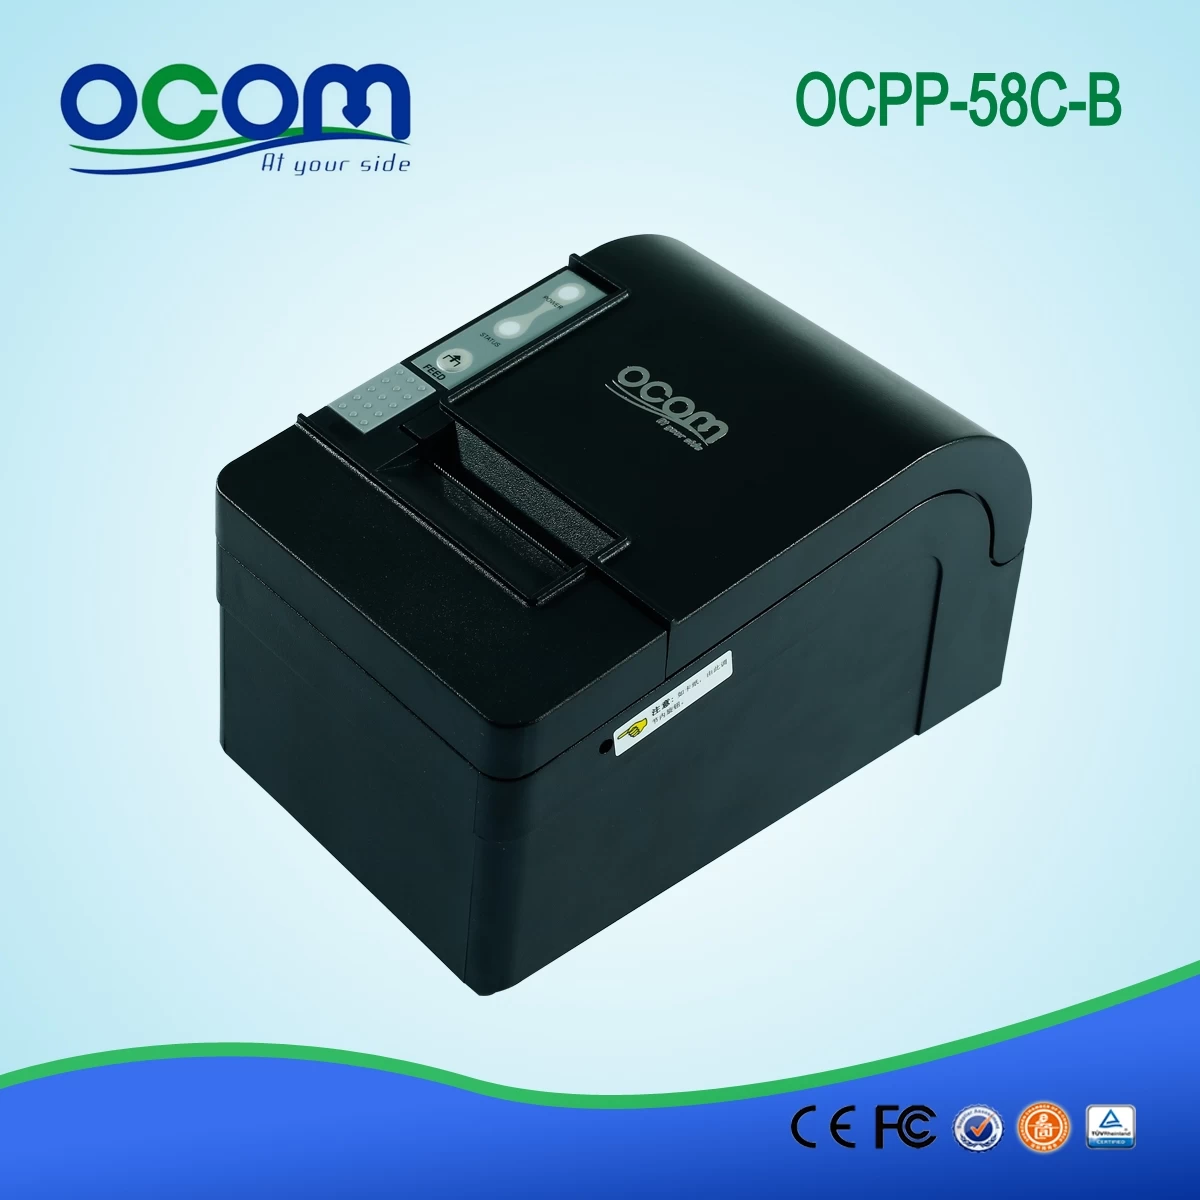 2-inch thermal POS printer with cutter Anto (OCPP-58C)